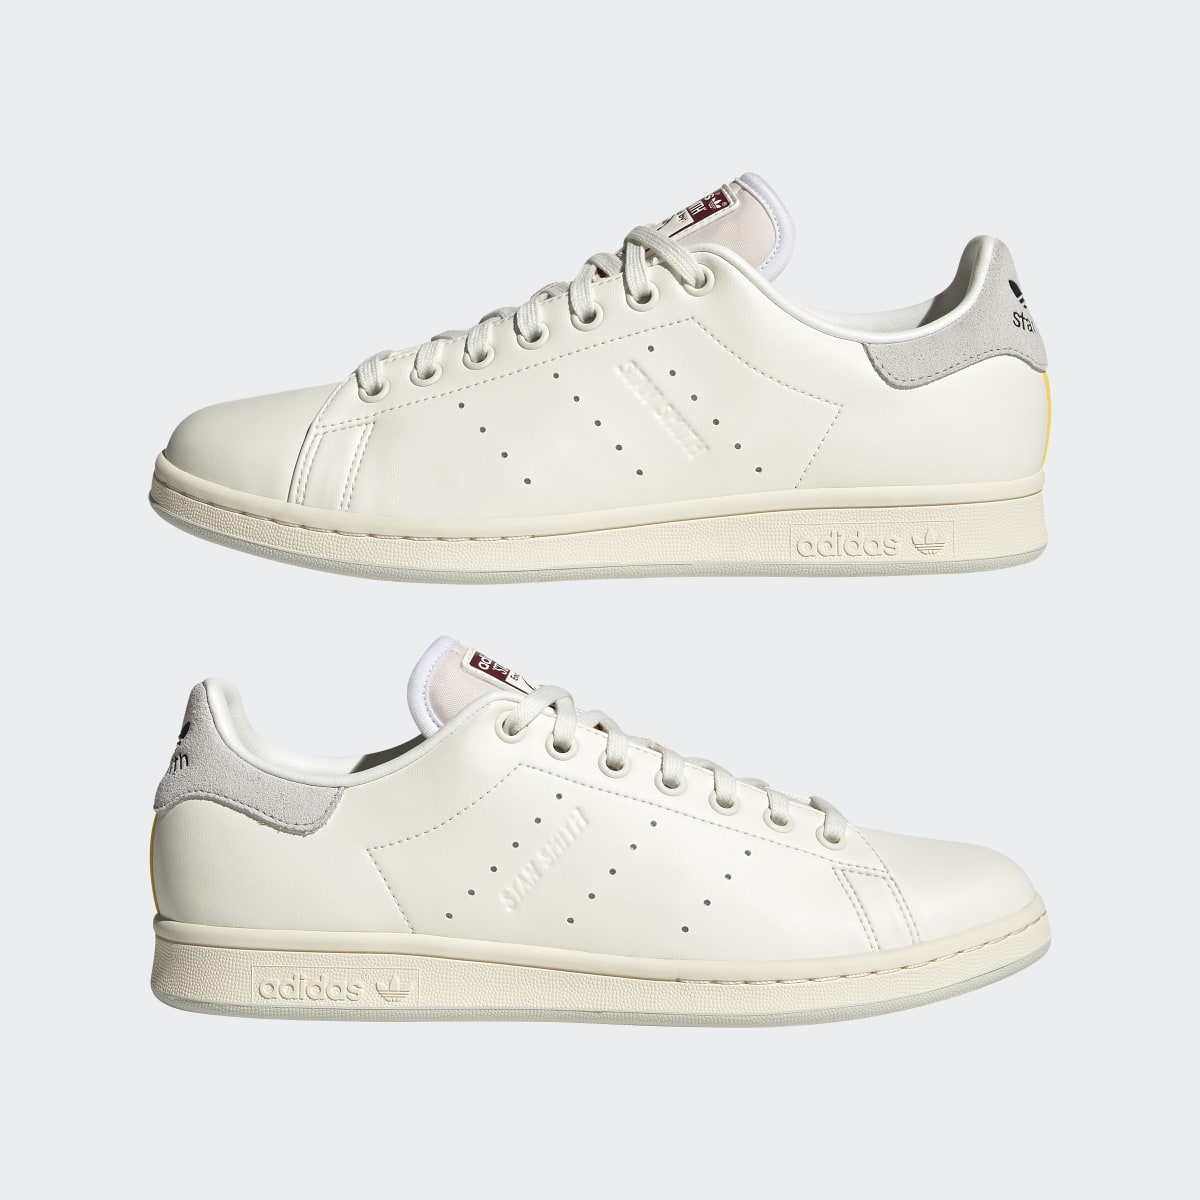 Adidas Stanniversary Stan Smith Shoes. 13